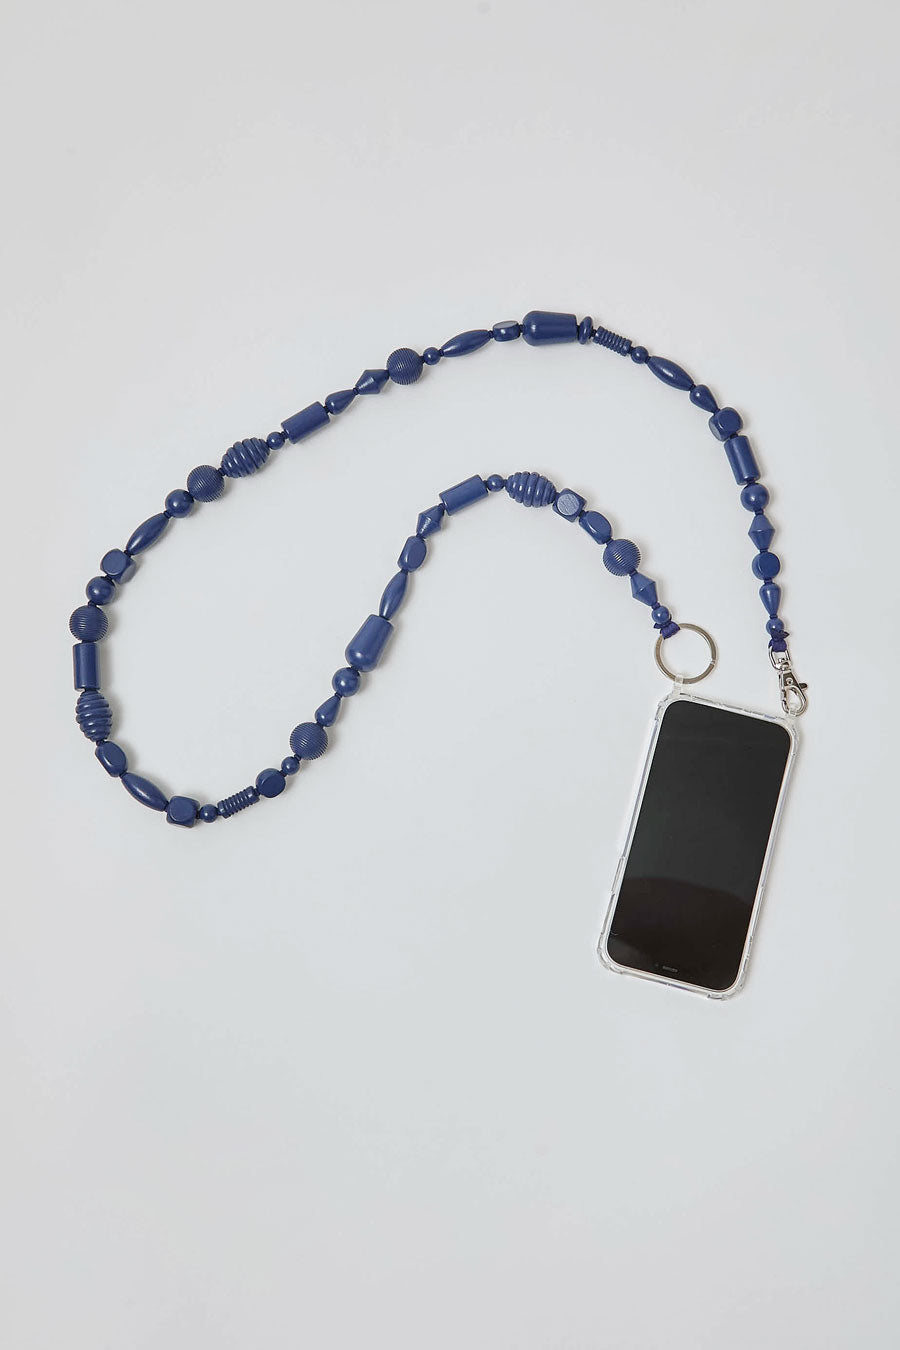 Ina Seifart Handykette Iphone Necklace in Blueberry Bunter Mix